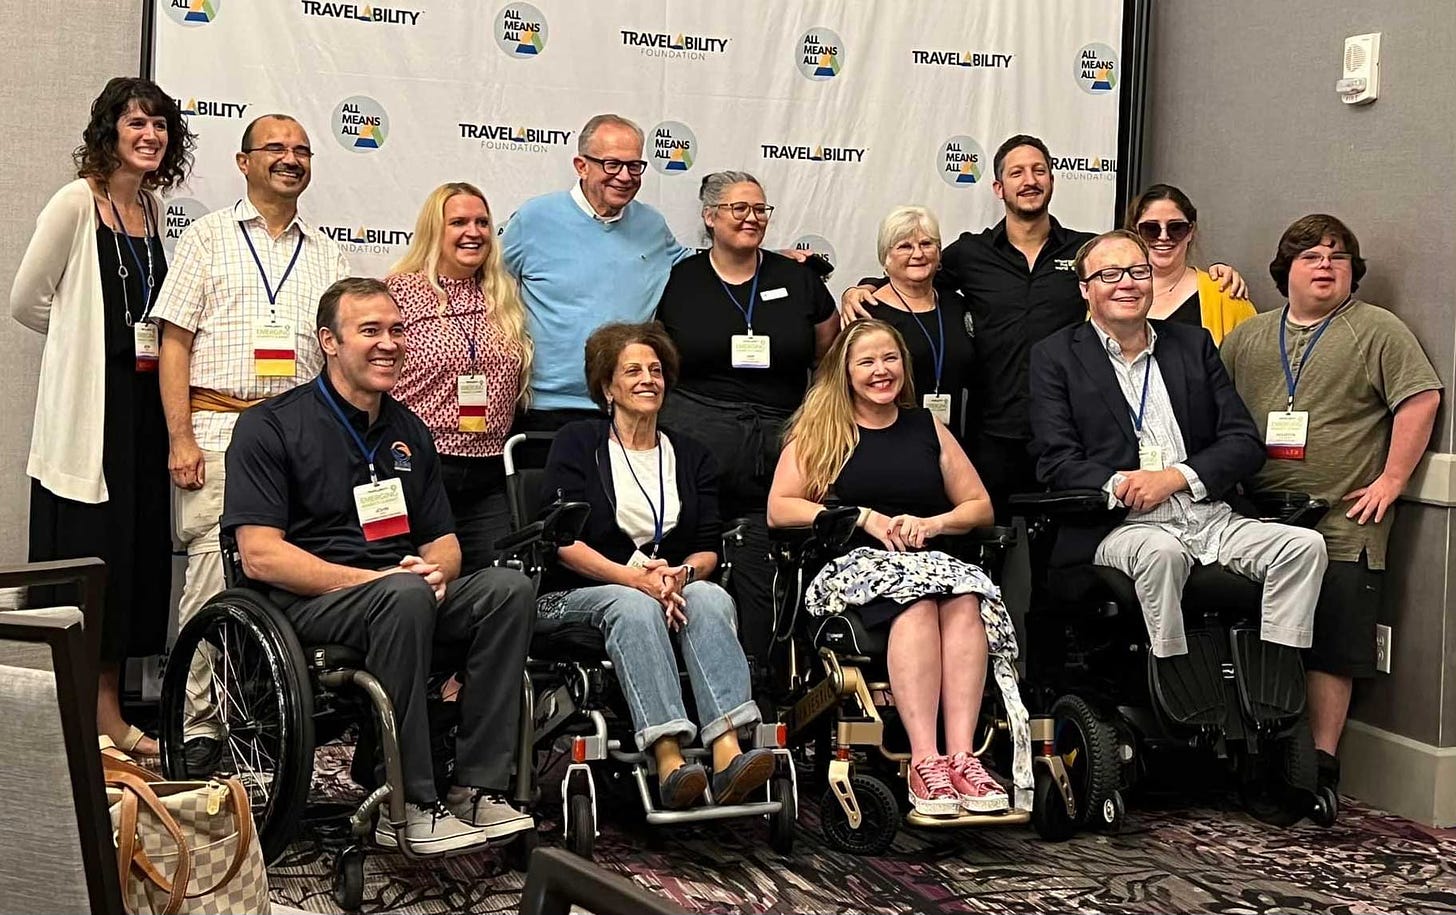 John with a group of wheelchair users and disability advocates at a conference.